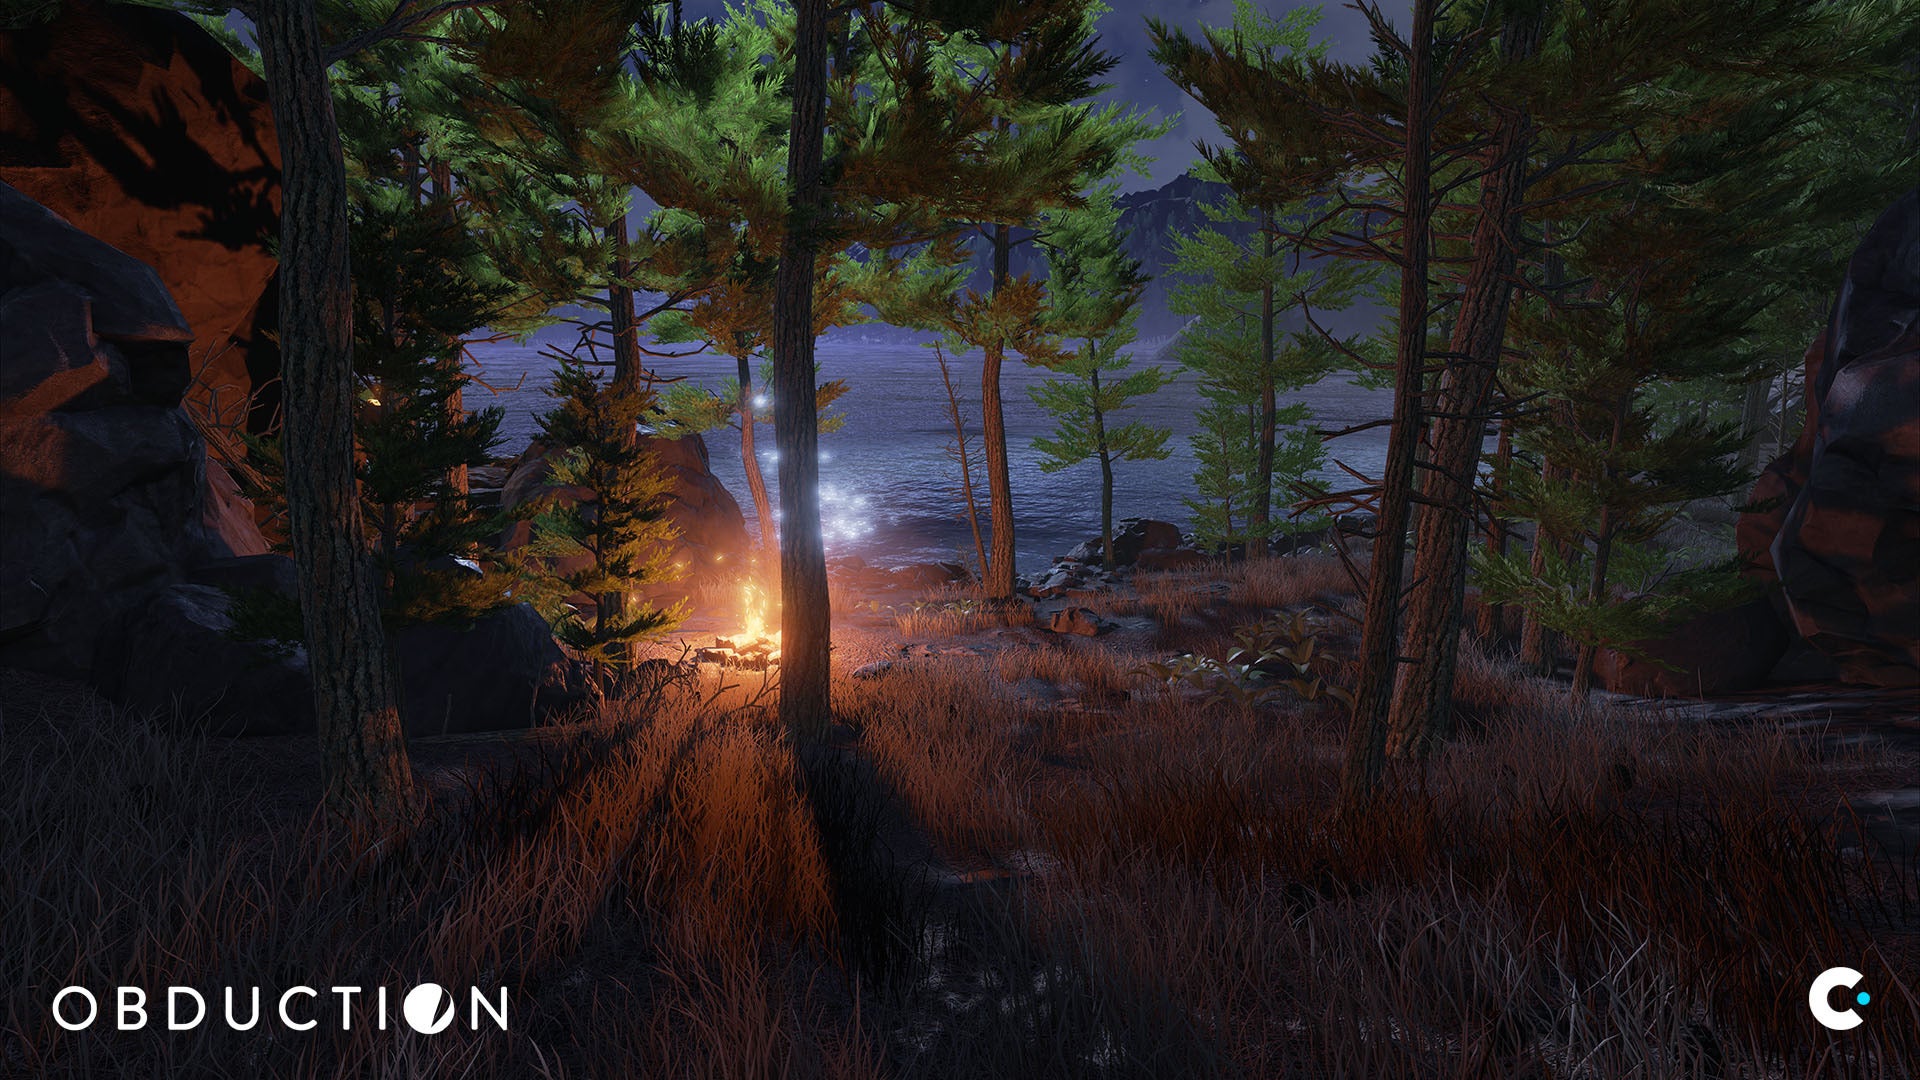 myst obduction download free